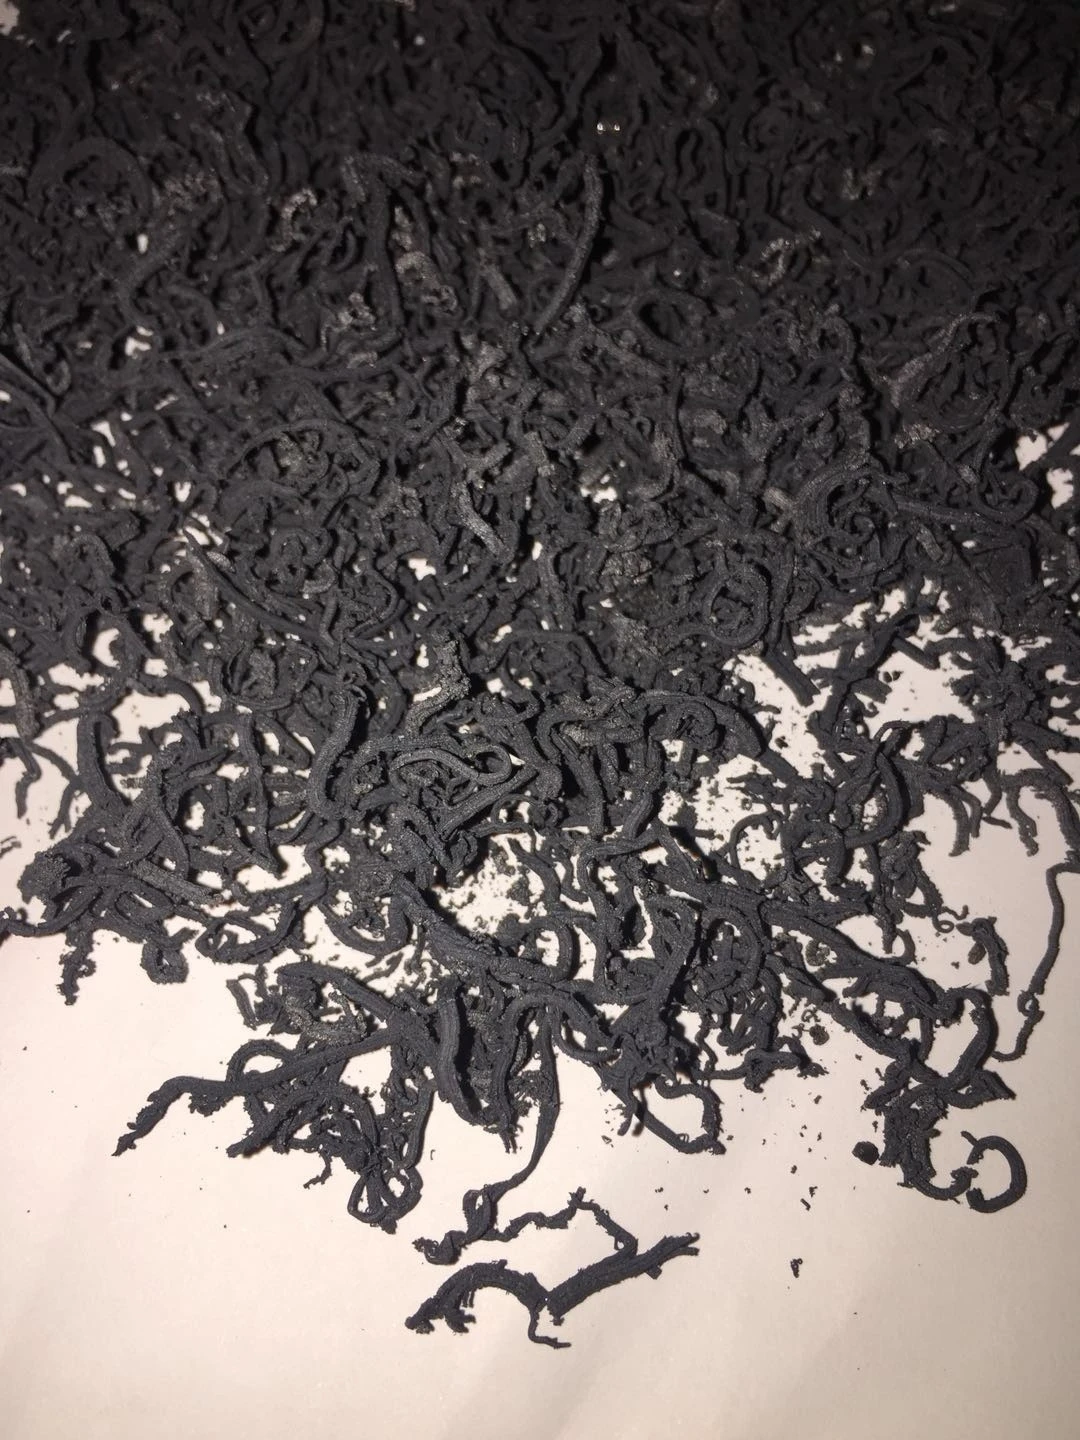 High-purity ultra-clean expanded graphite powder, used in the production of electrodes